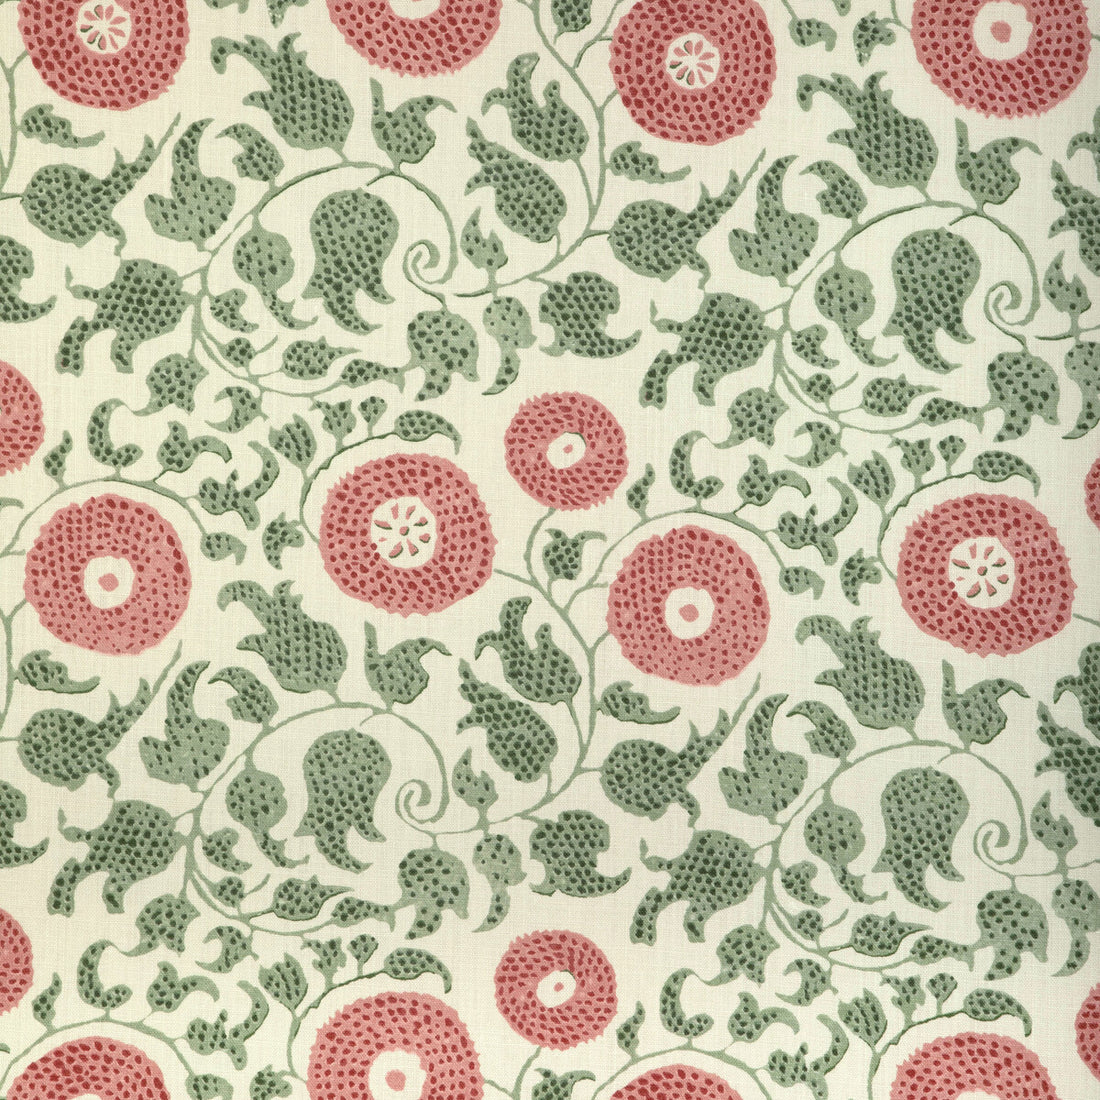 Eldora Print fabric in leaf/rose color - pattern 2020204.73.0 - by Lee Jofa in the Clare Prints collection